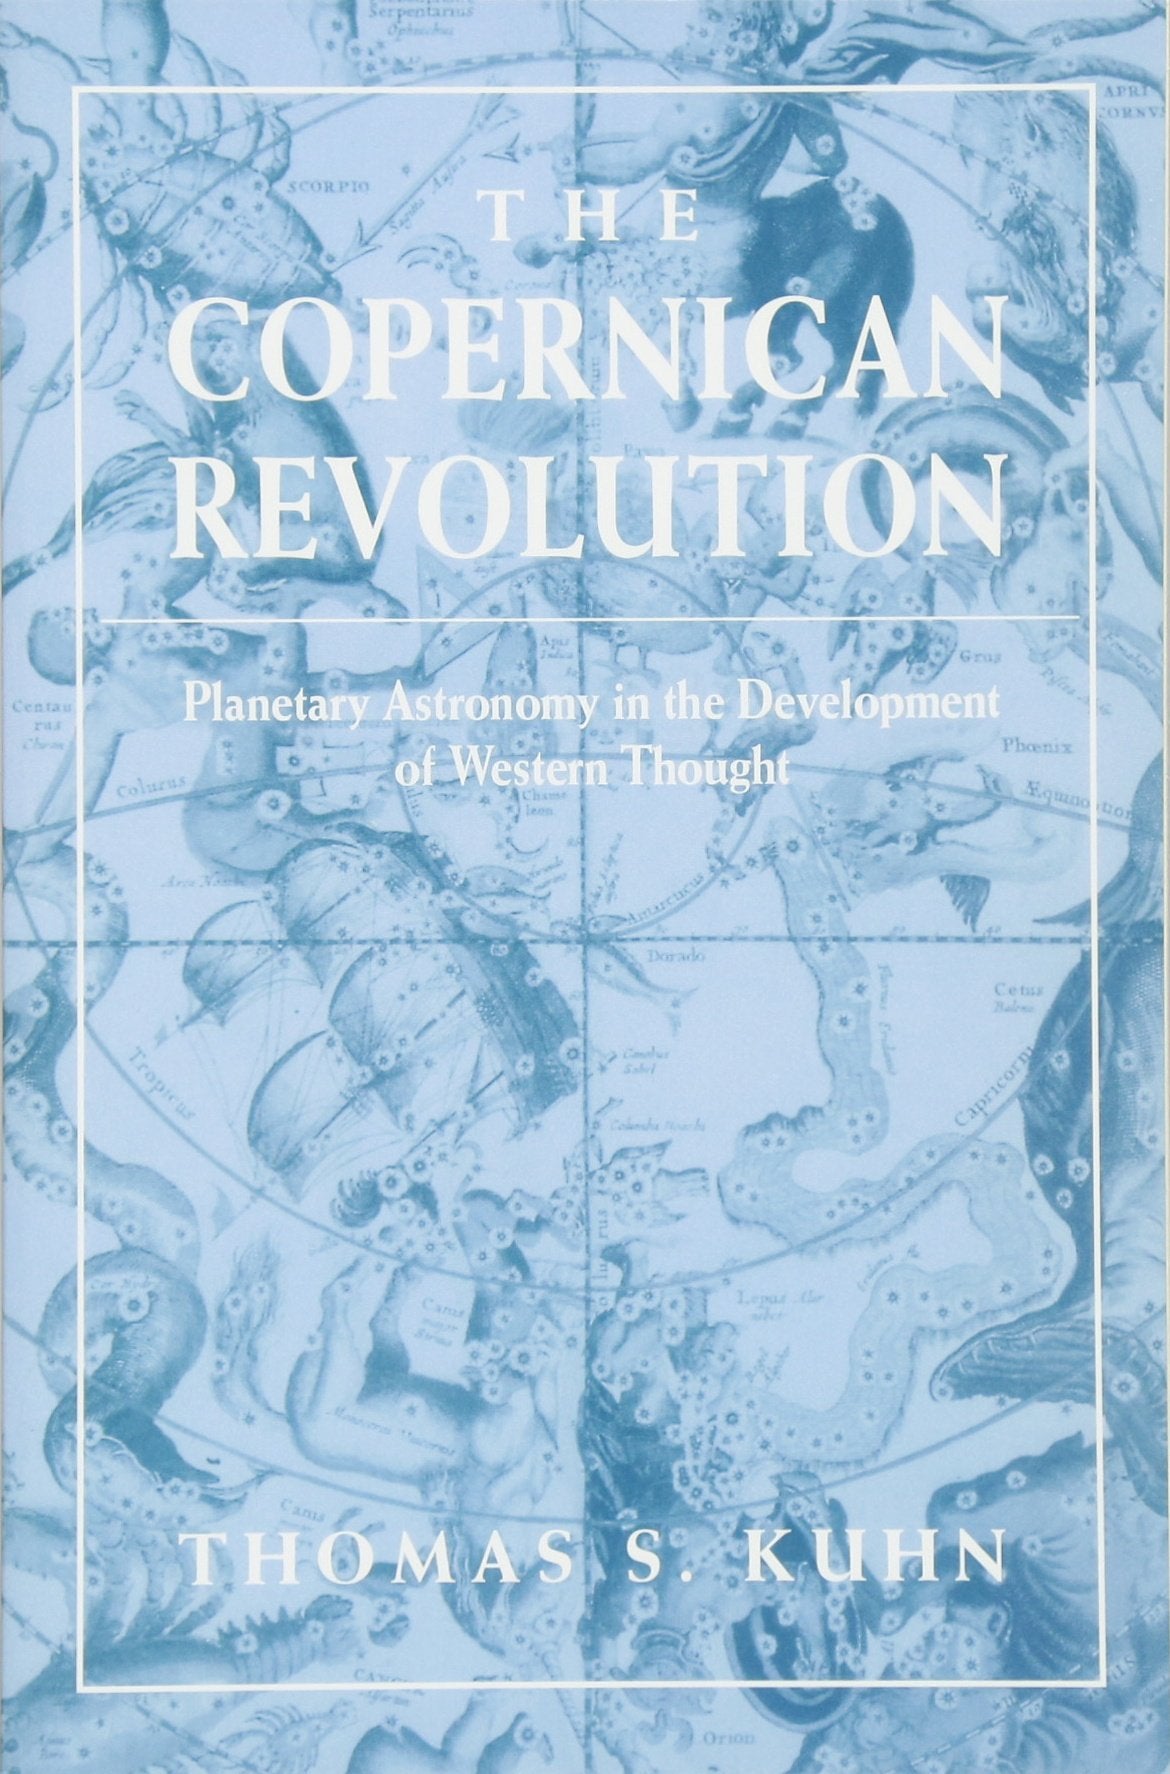 The Copernican Revolution: Planetary Astronomy in the Development of Western Thought ***